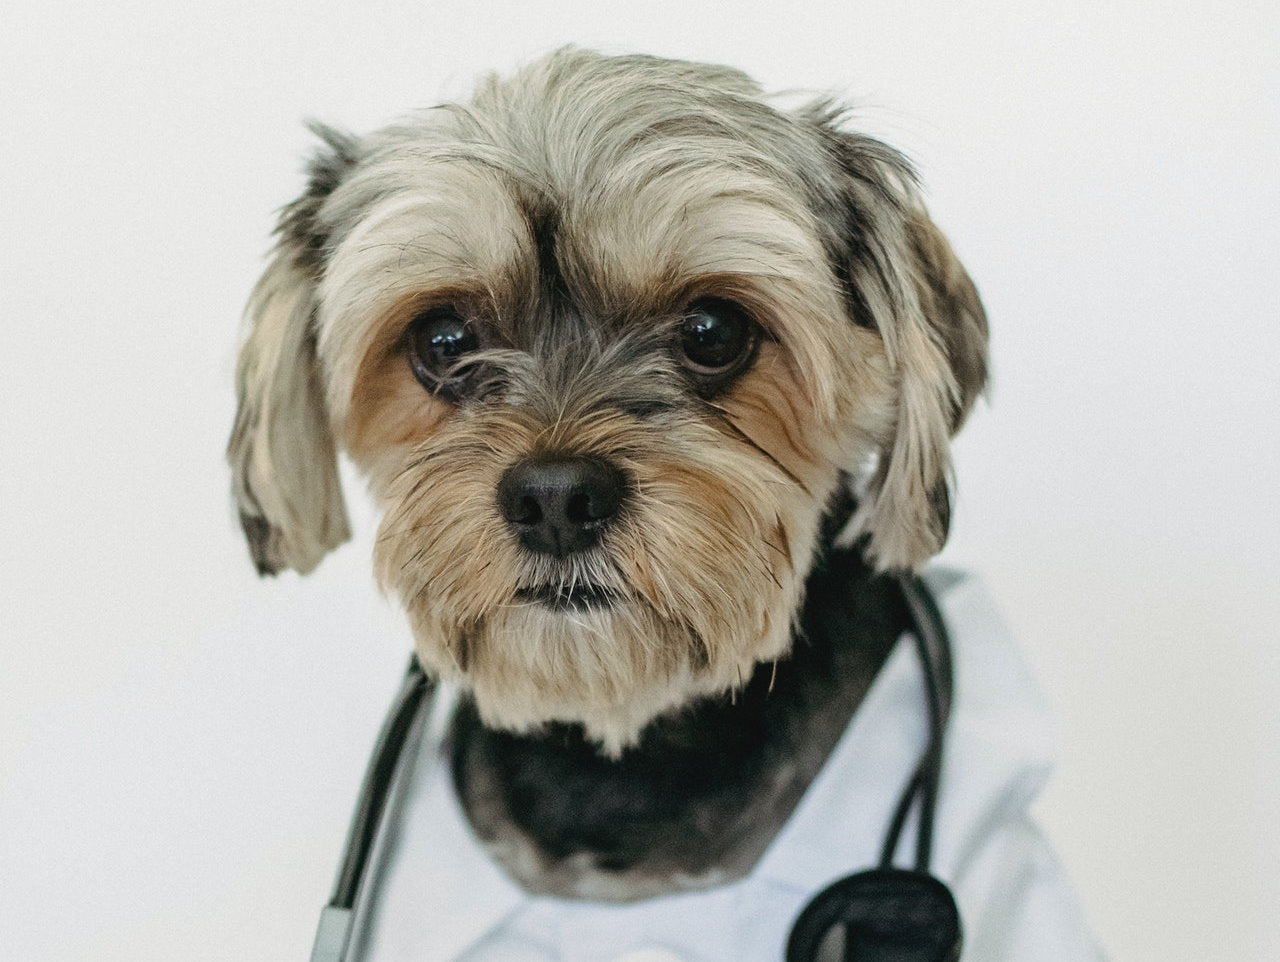 Should you take your dog to the vet? 